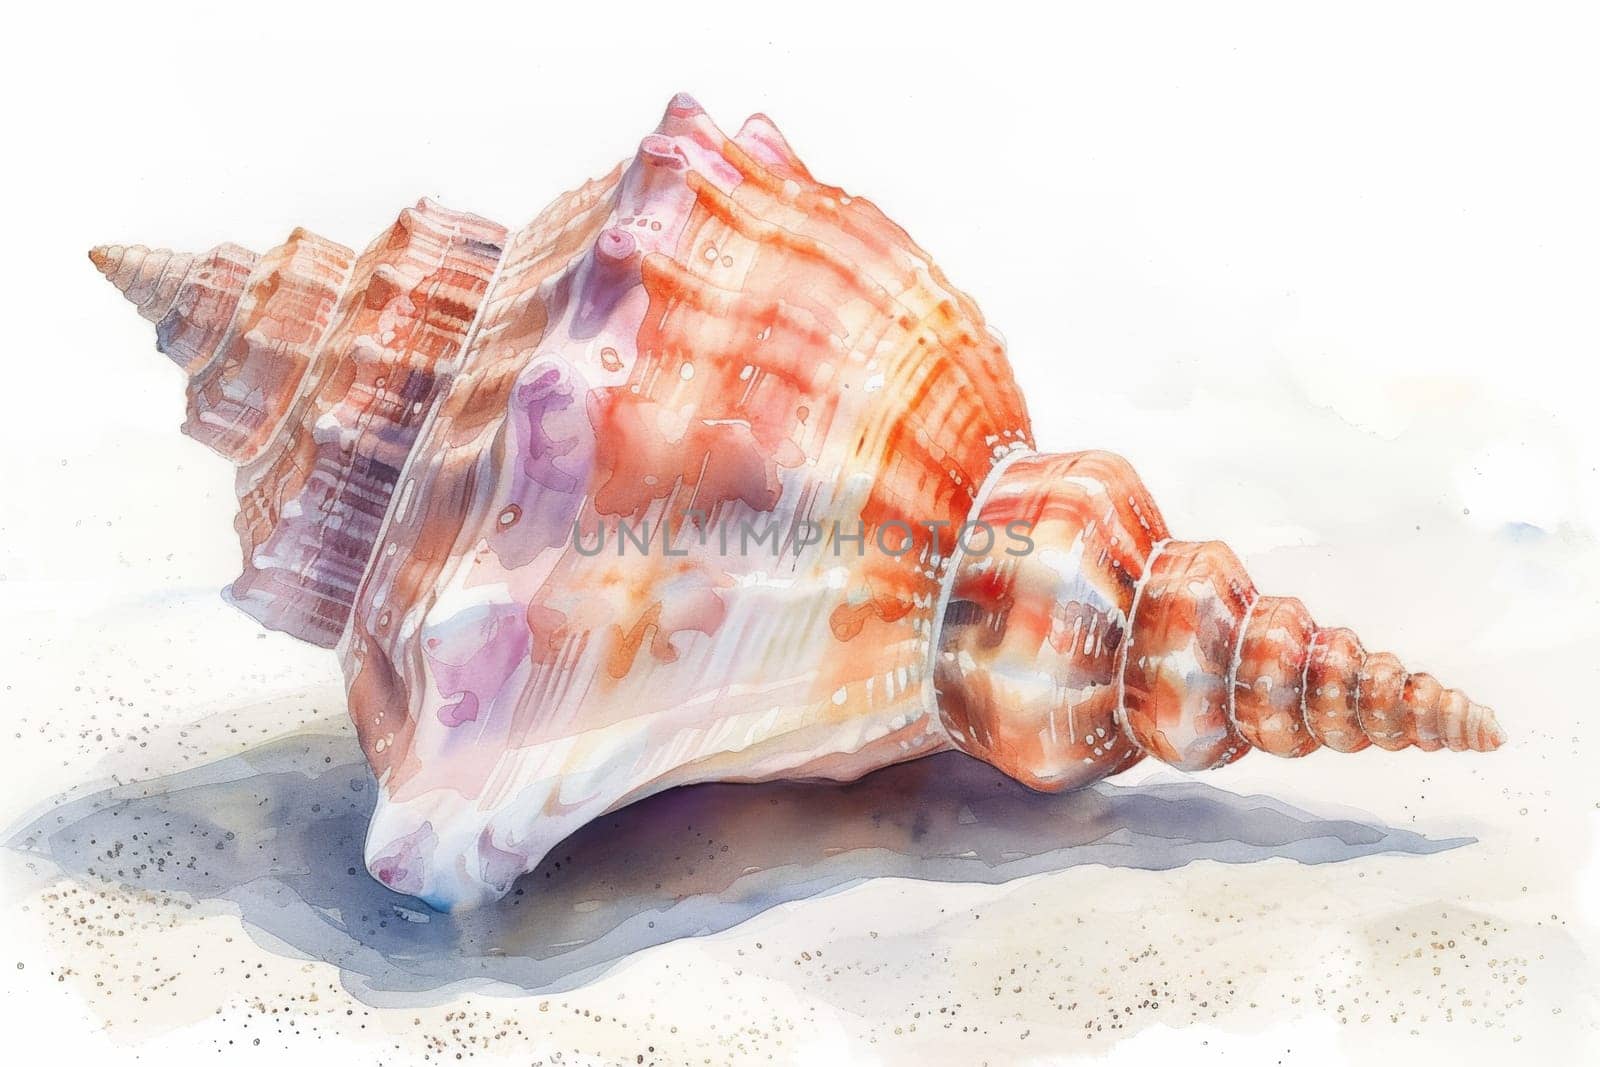 A large seashell on a white background. Illustration by Lobachad